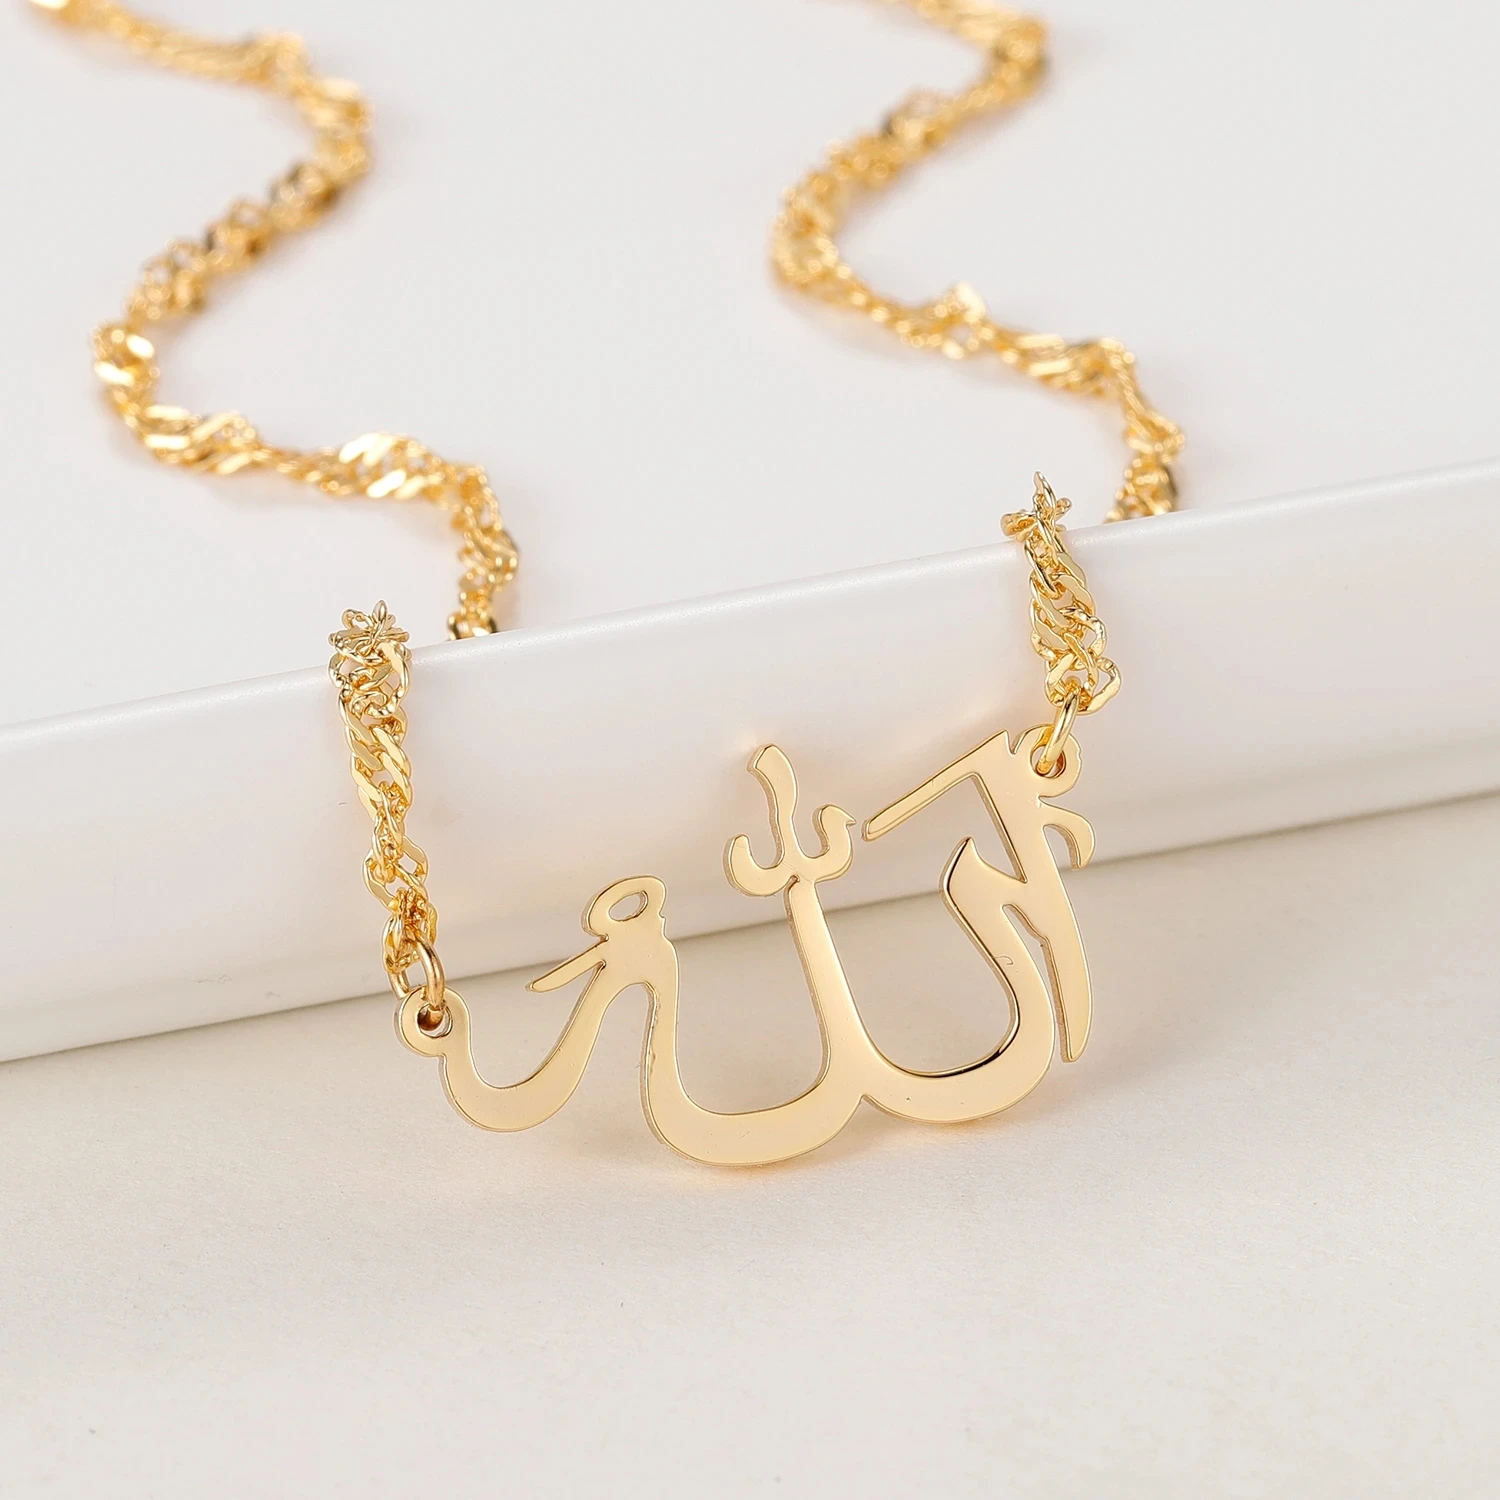 Custom Name Arabic Calligraphy Necklace Stainless Steel Pendants Islam Muslim Religious Jewelry For Women Mother's Day Gifts ayatul kursi necklaces custom stainless steel pendants necklaces gold jewelry islam muslim arabic god messager jewelr gift